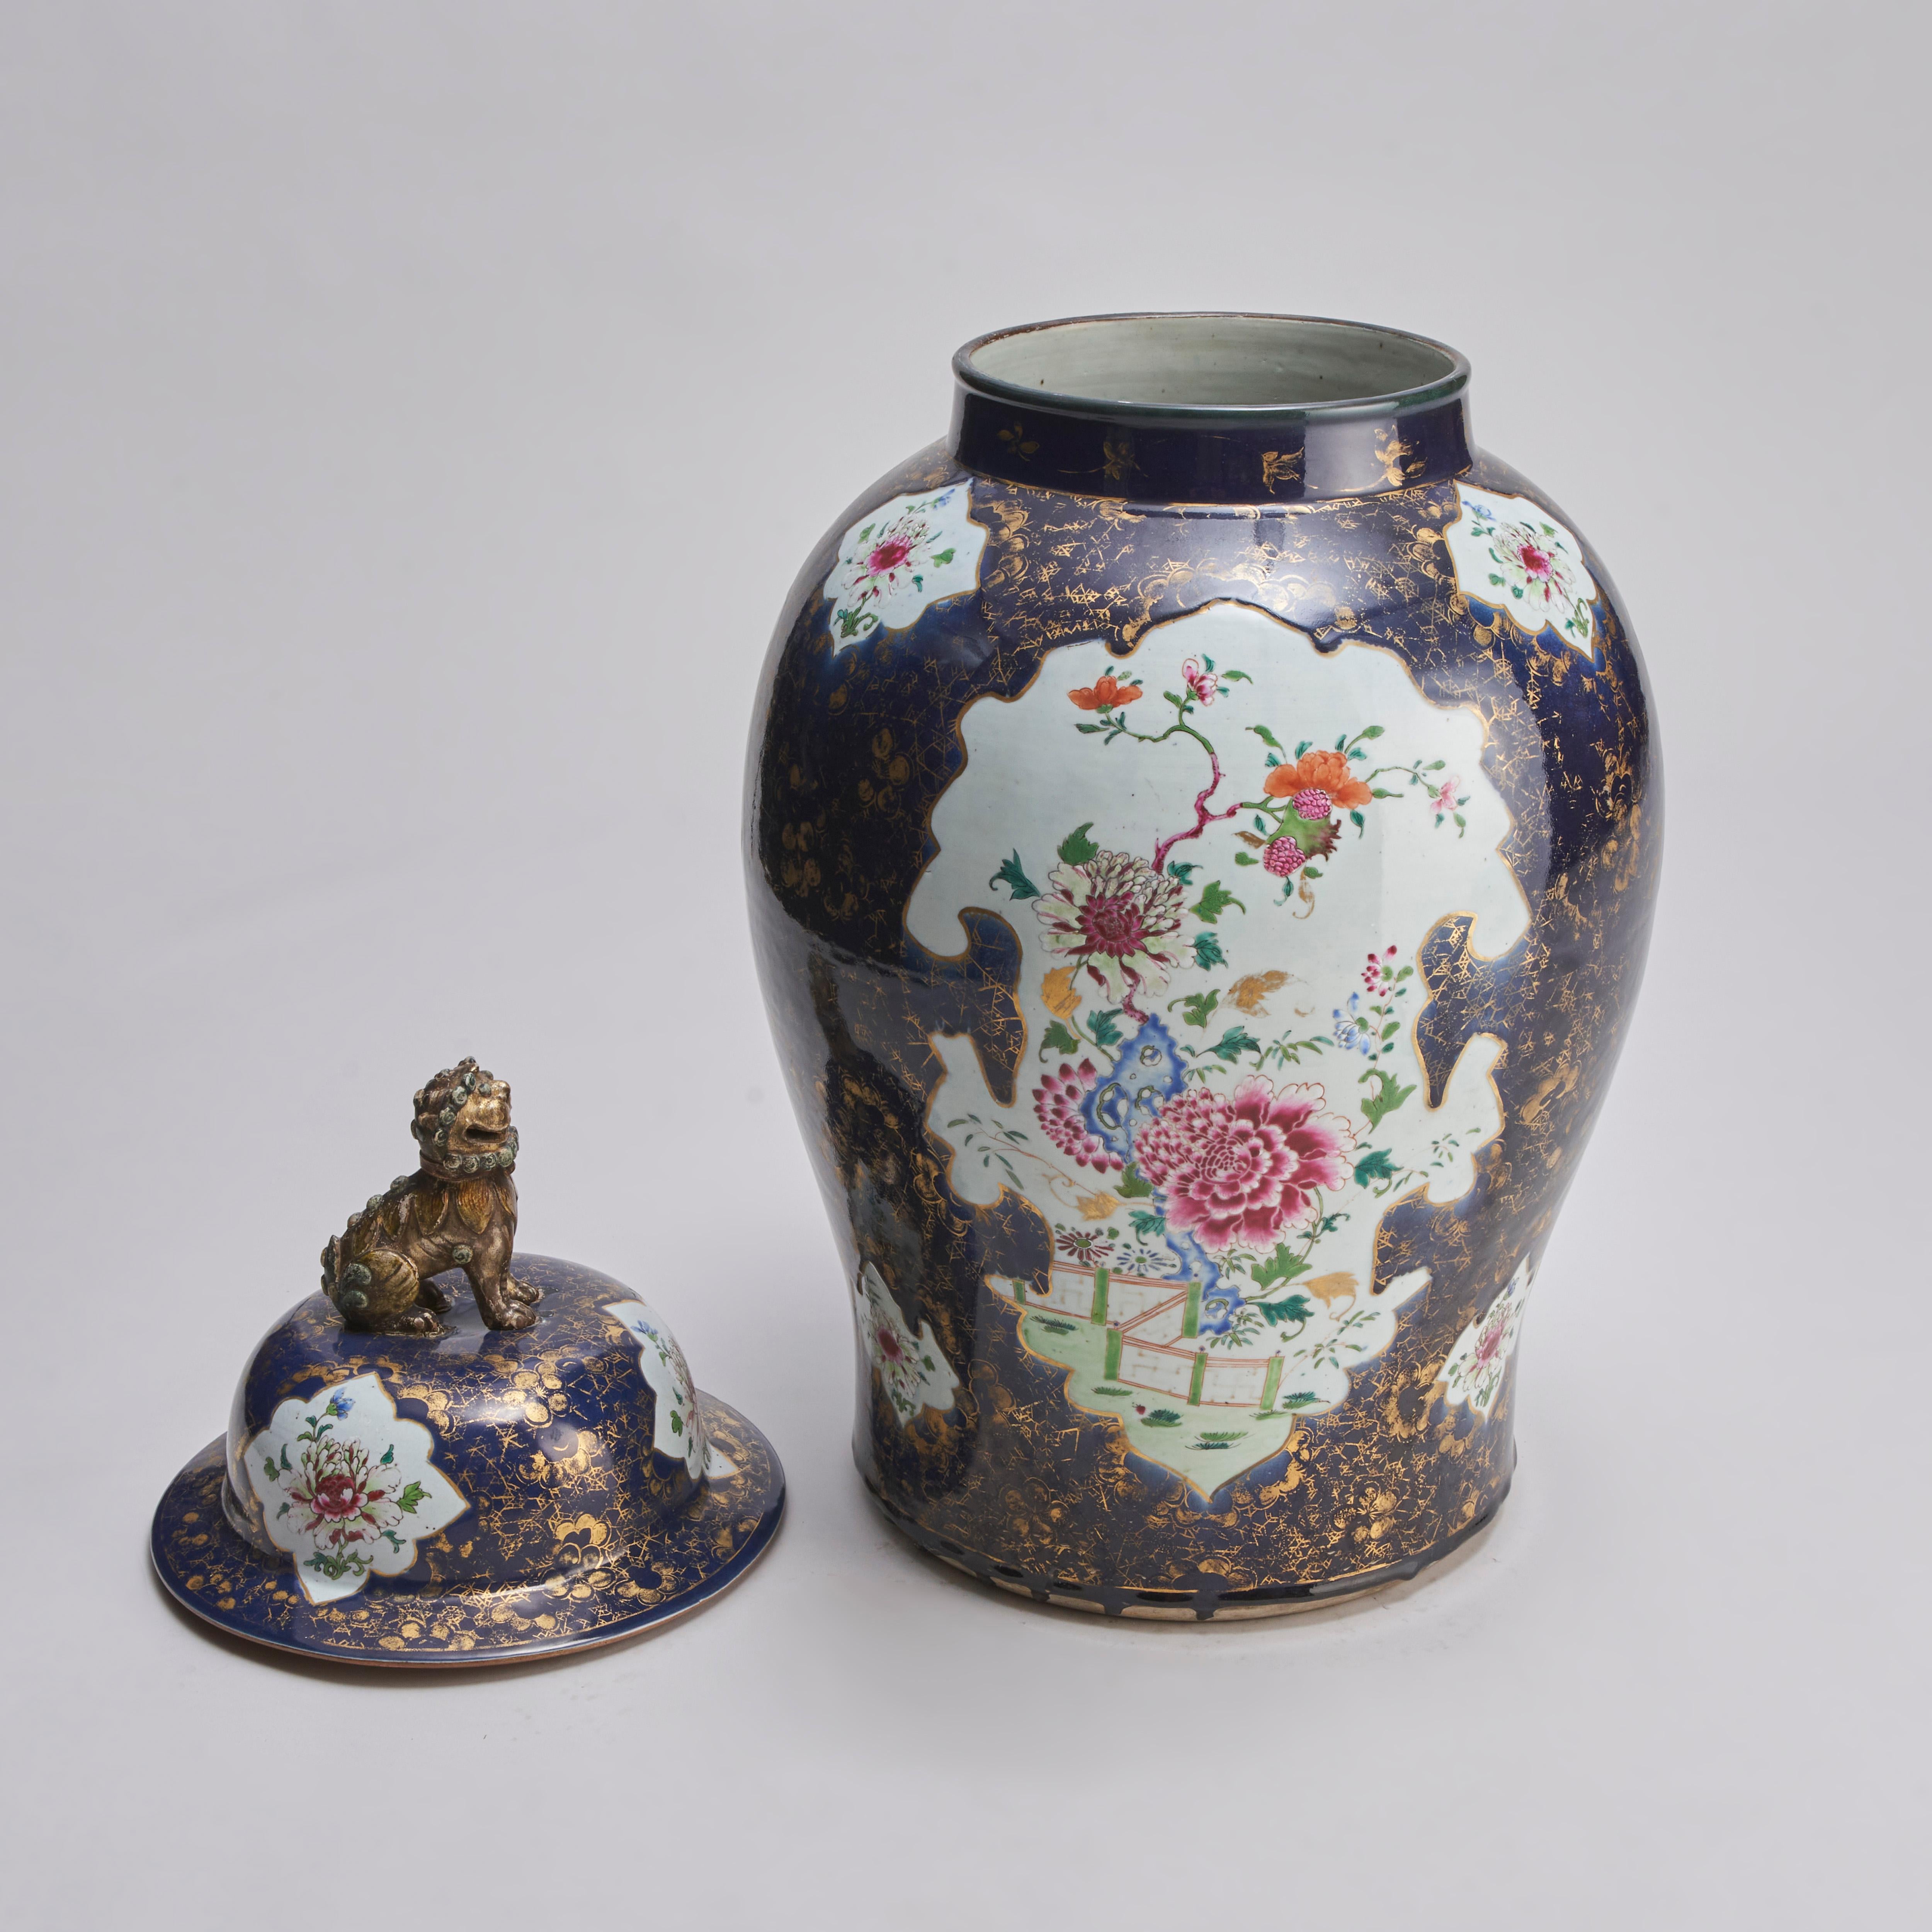 Porcelain An impressive Chinese, 18th Century Powder blue and Famille rose Temple jar For Sale